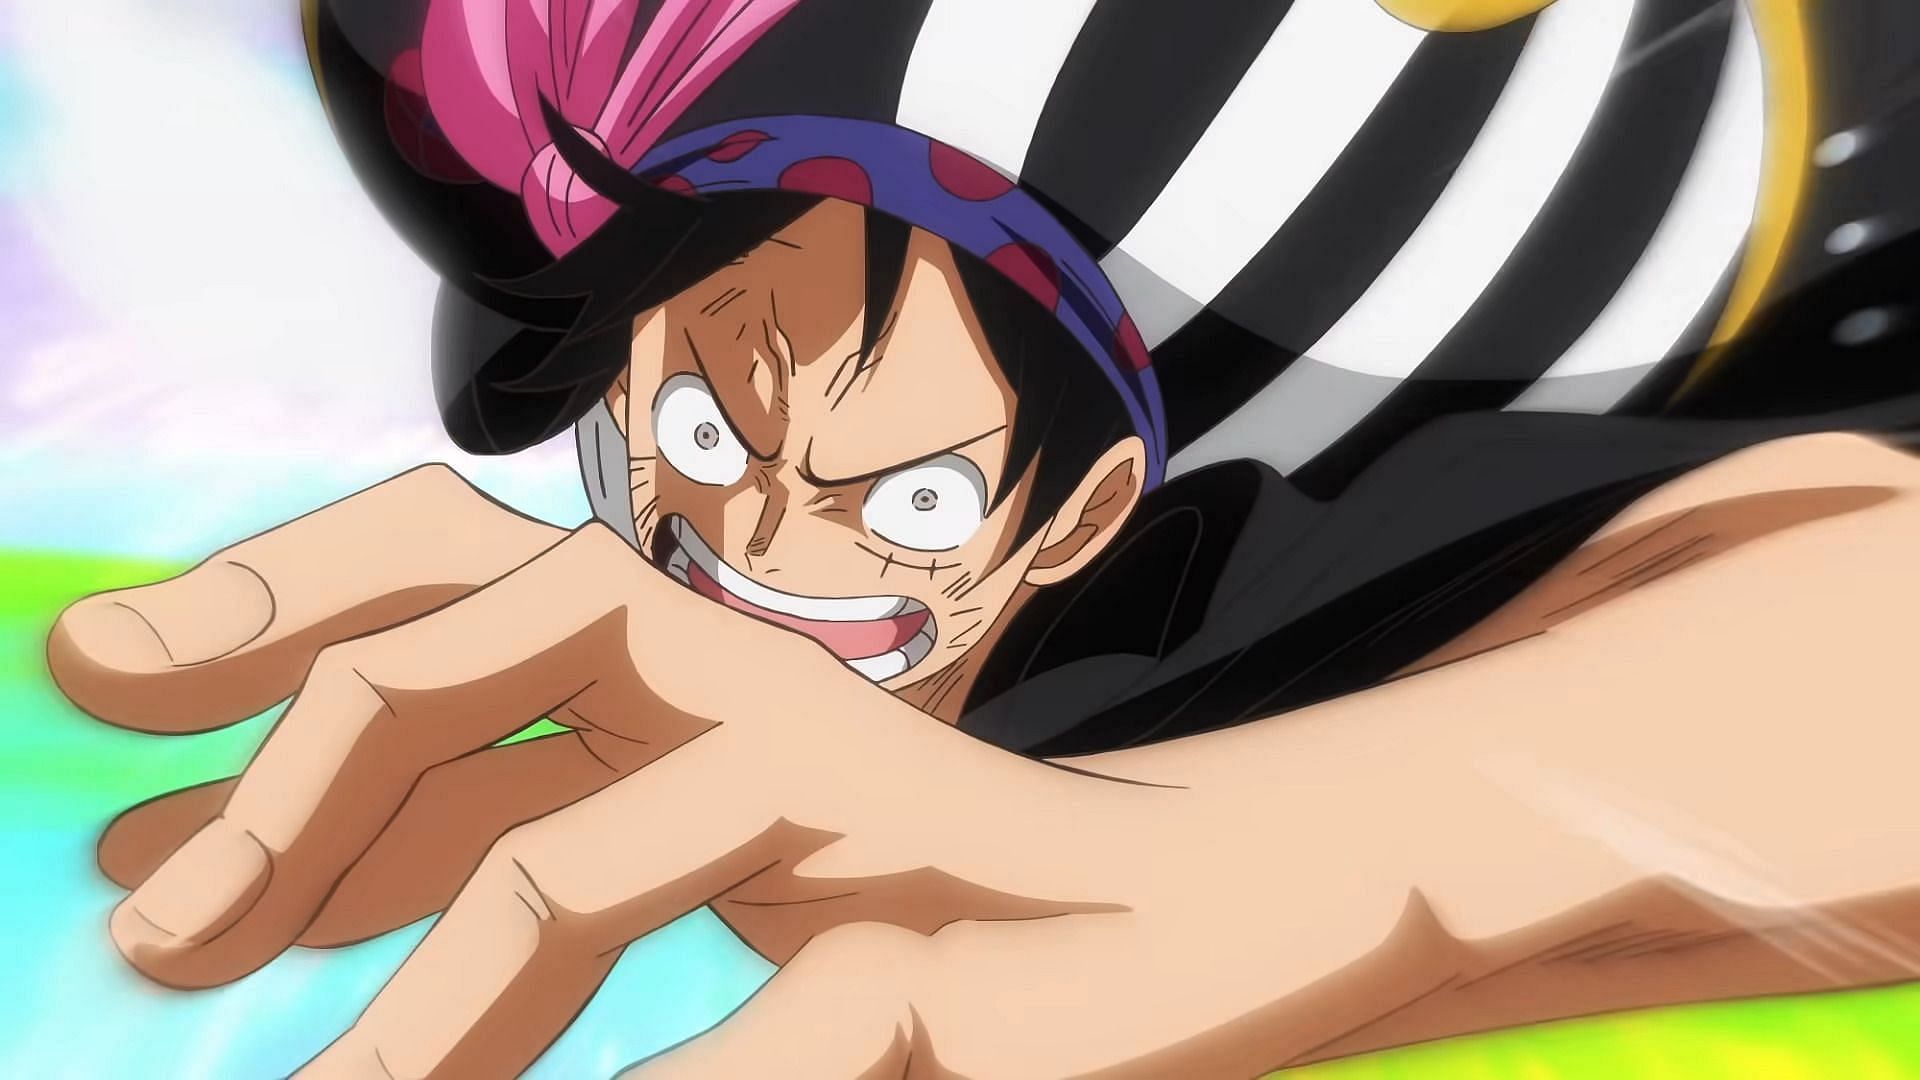 AI predicts the conclusion of One Piece (Image via Ufotable)